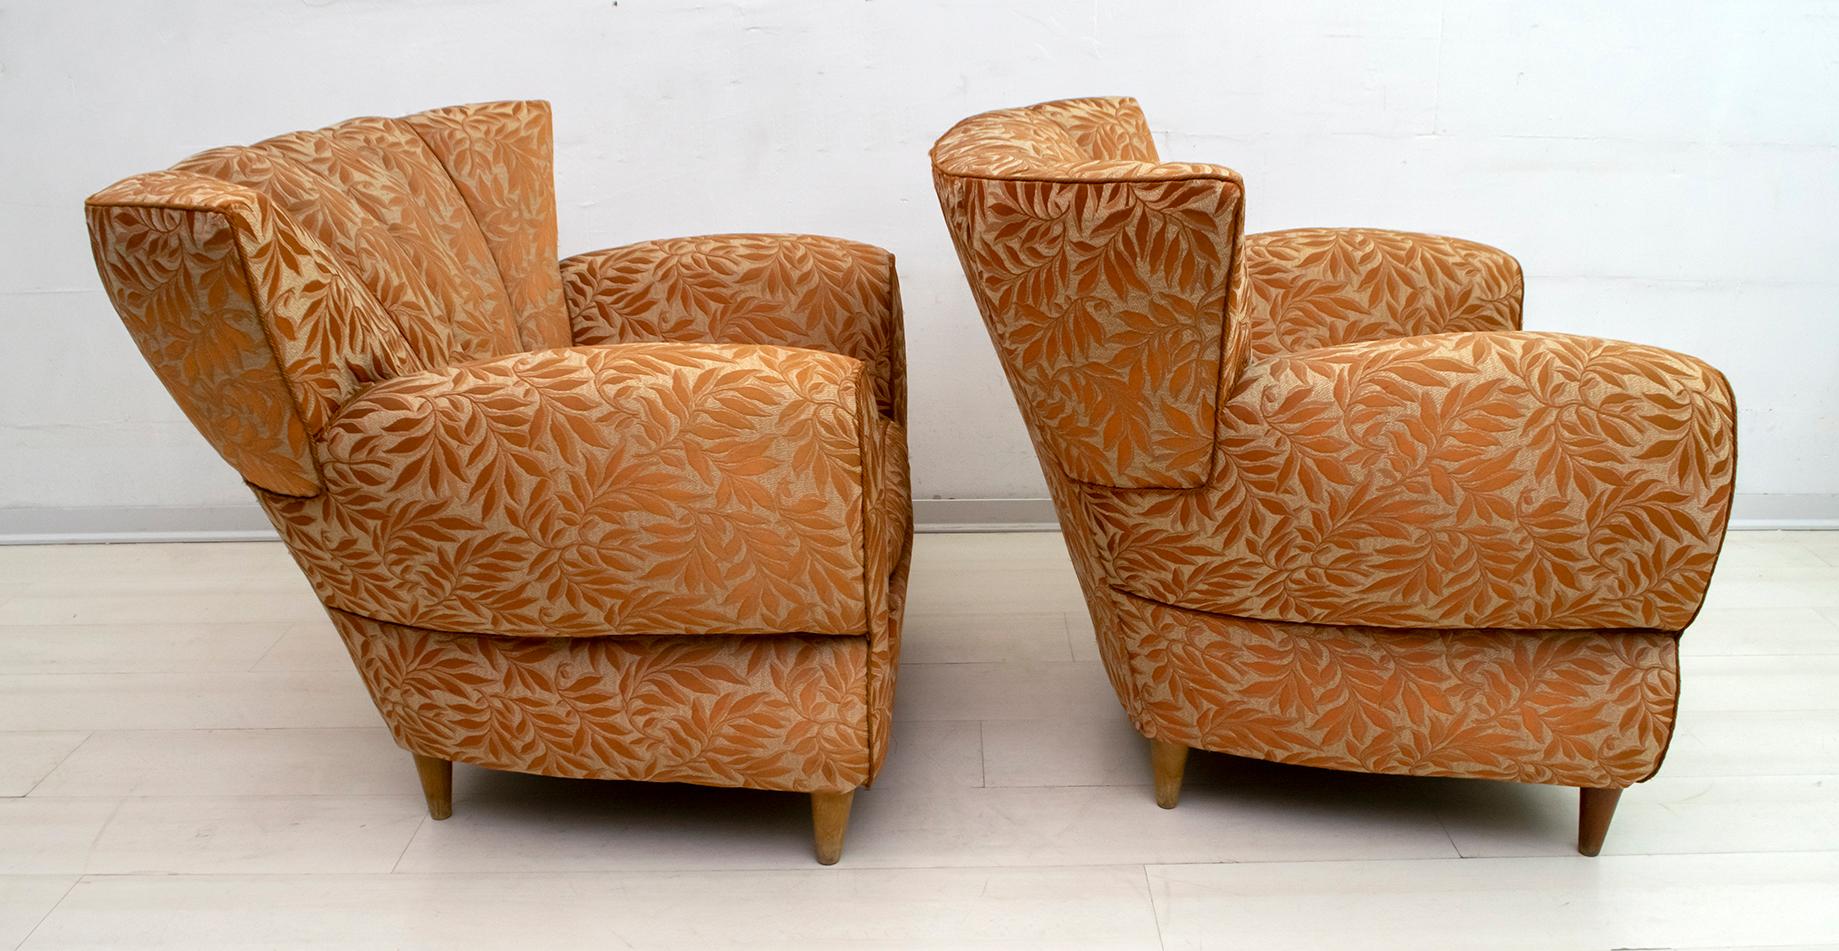 Mid-20th Century Gugliemo Ulrich Art Deco Italian Sofa and Two Armchairs, 1940s For Sale